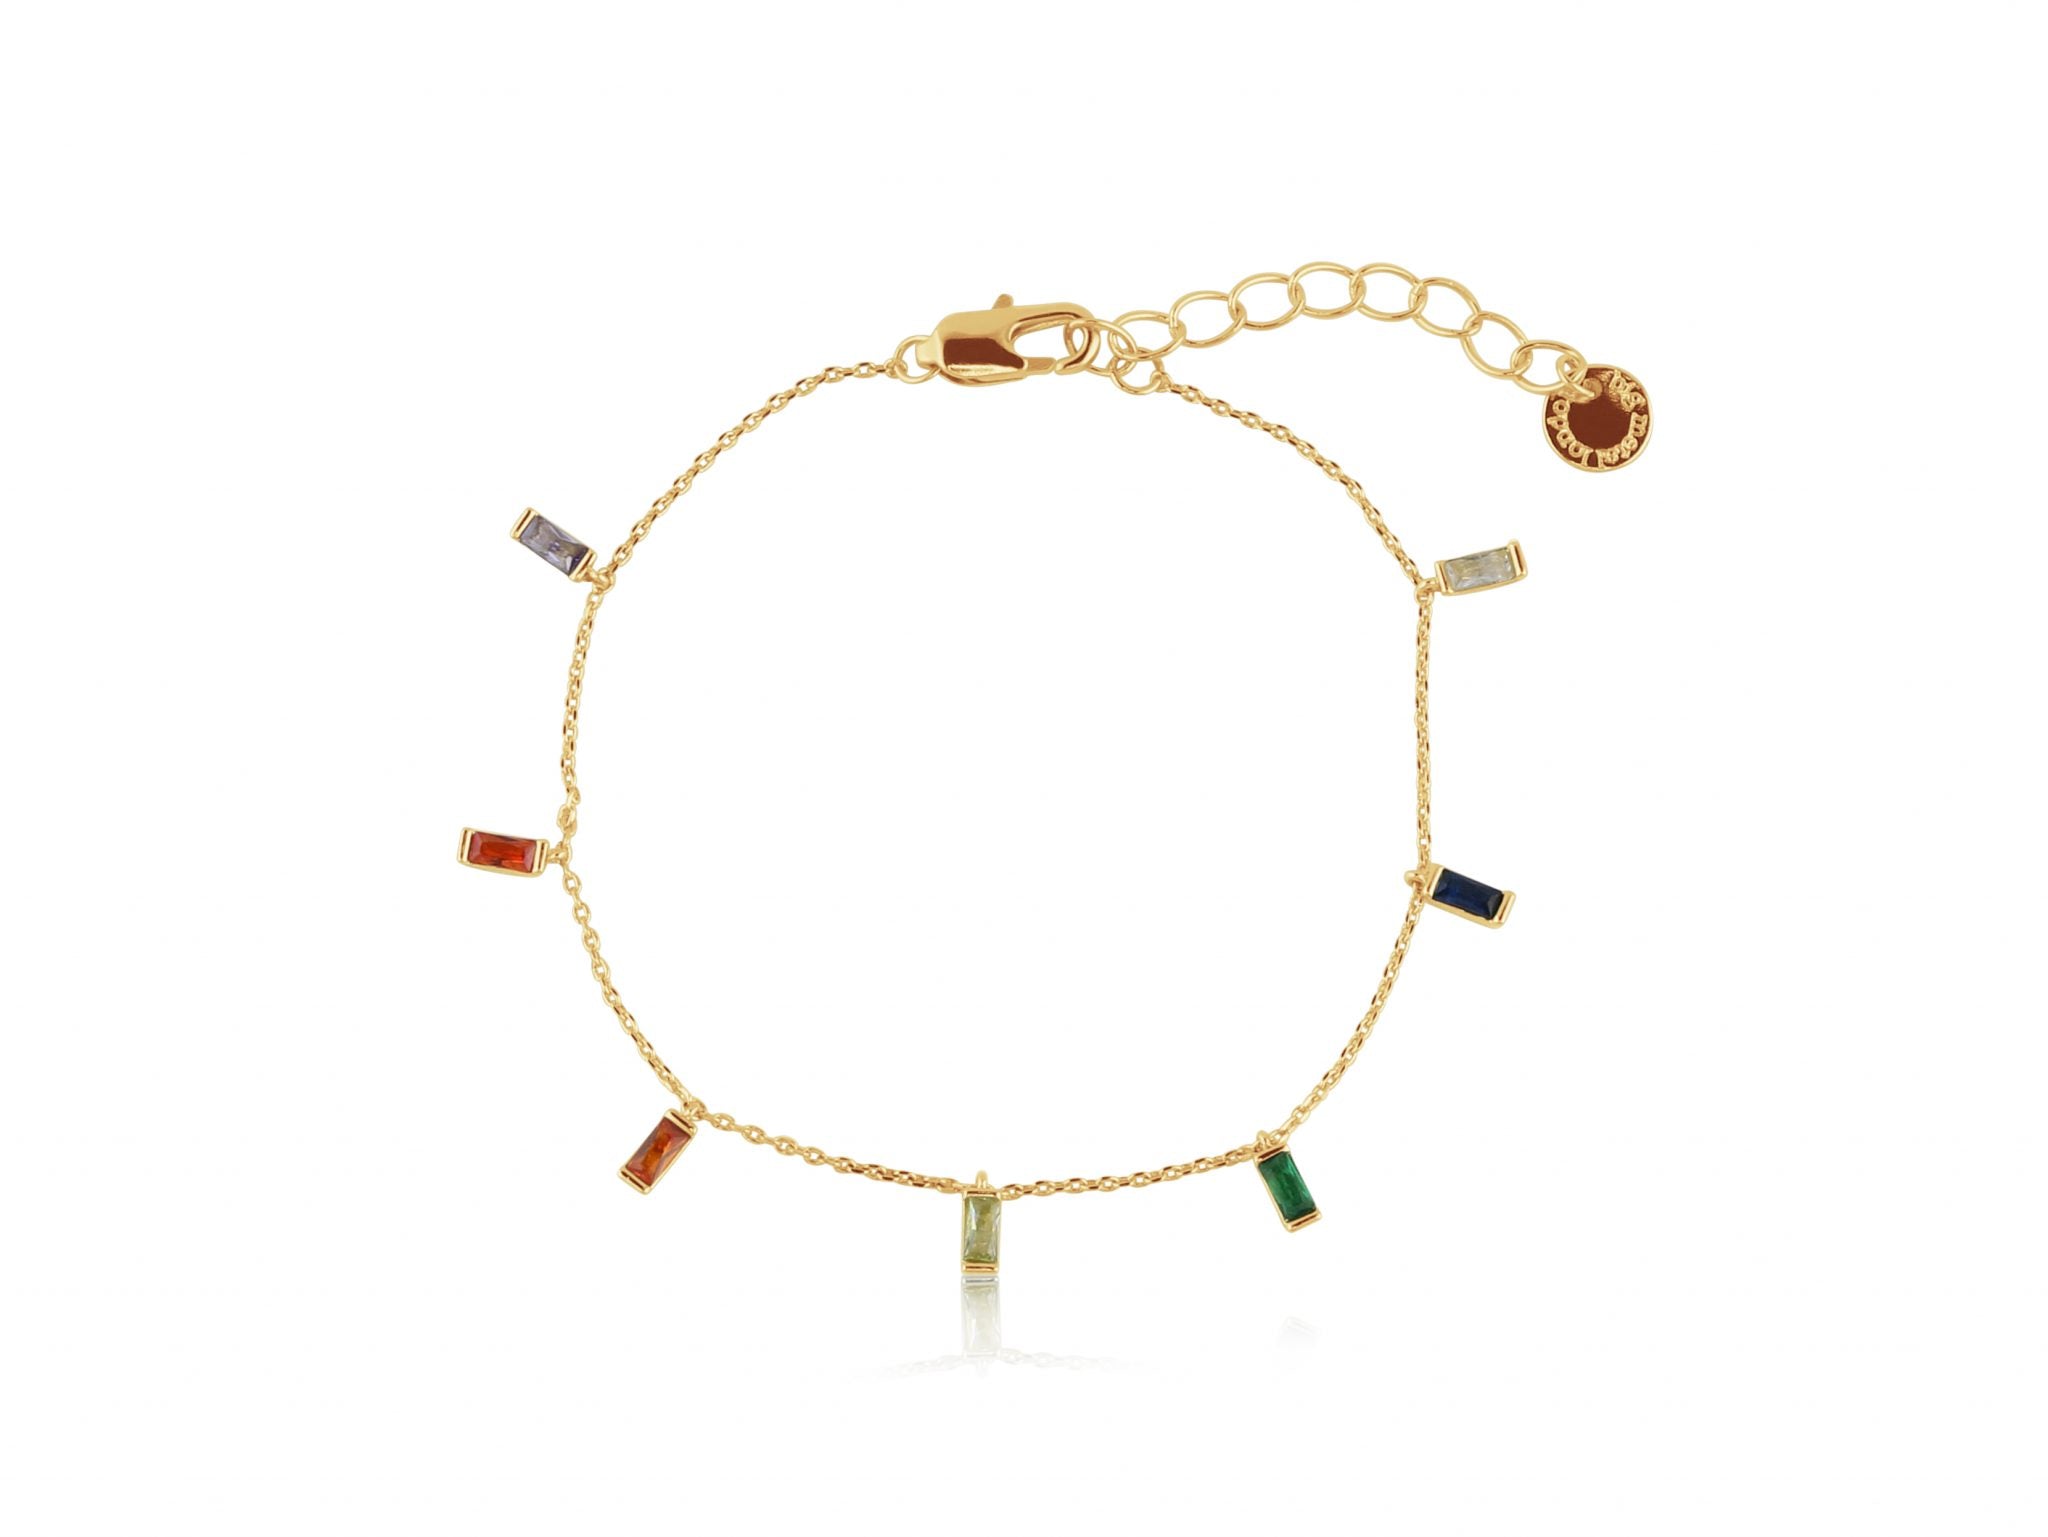 Gold delicate bracelet with rainbow stone charms